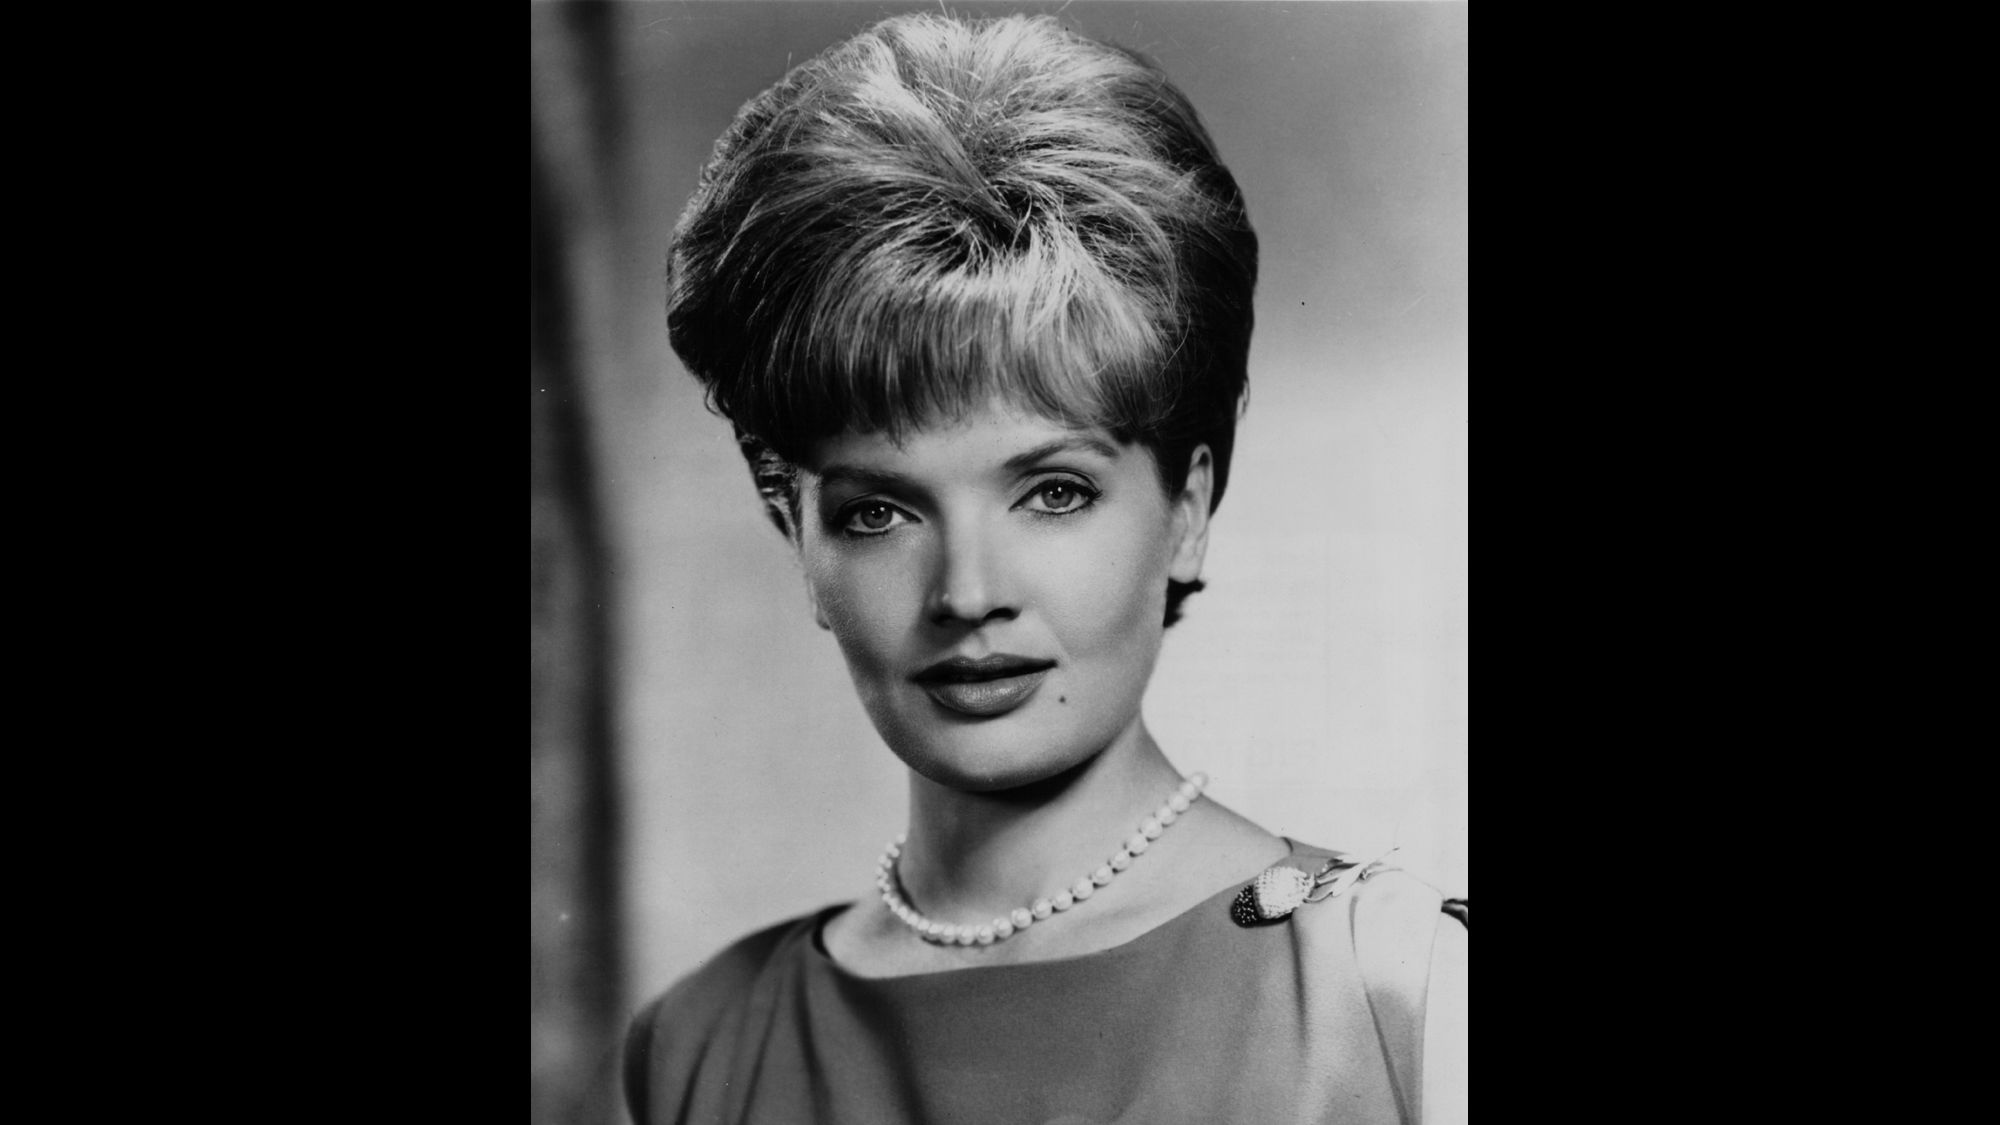 A look back at the life of Florence Henderson, 'America's mom